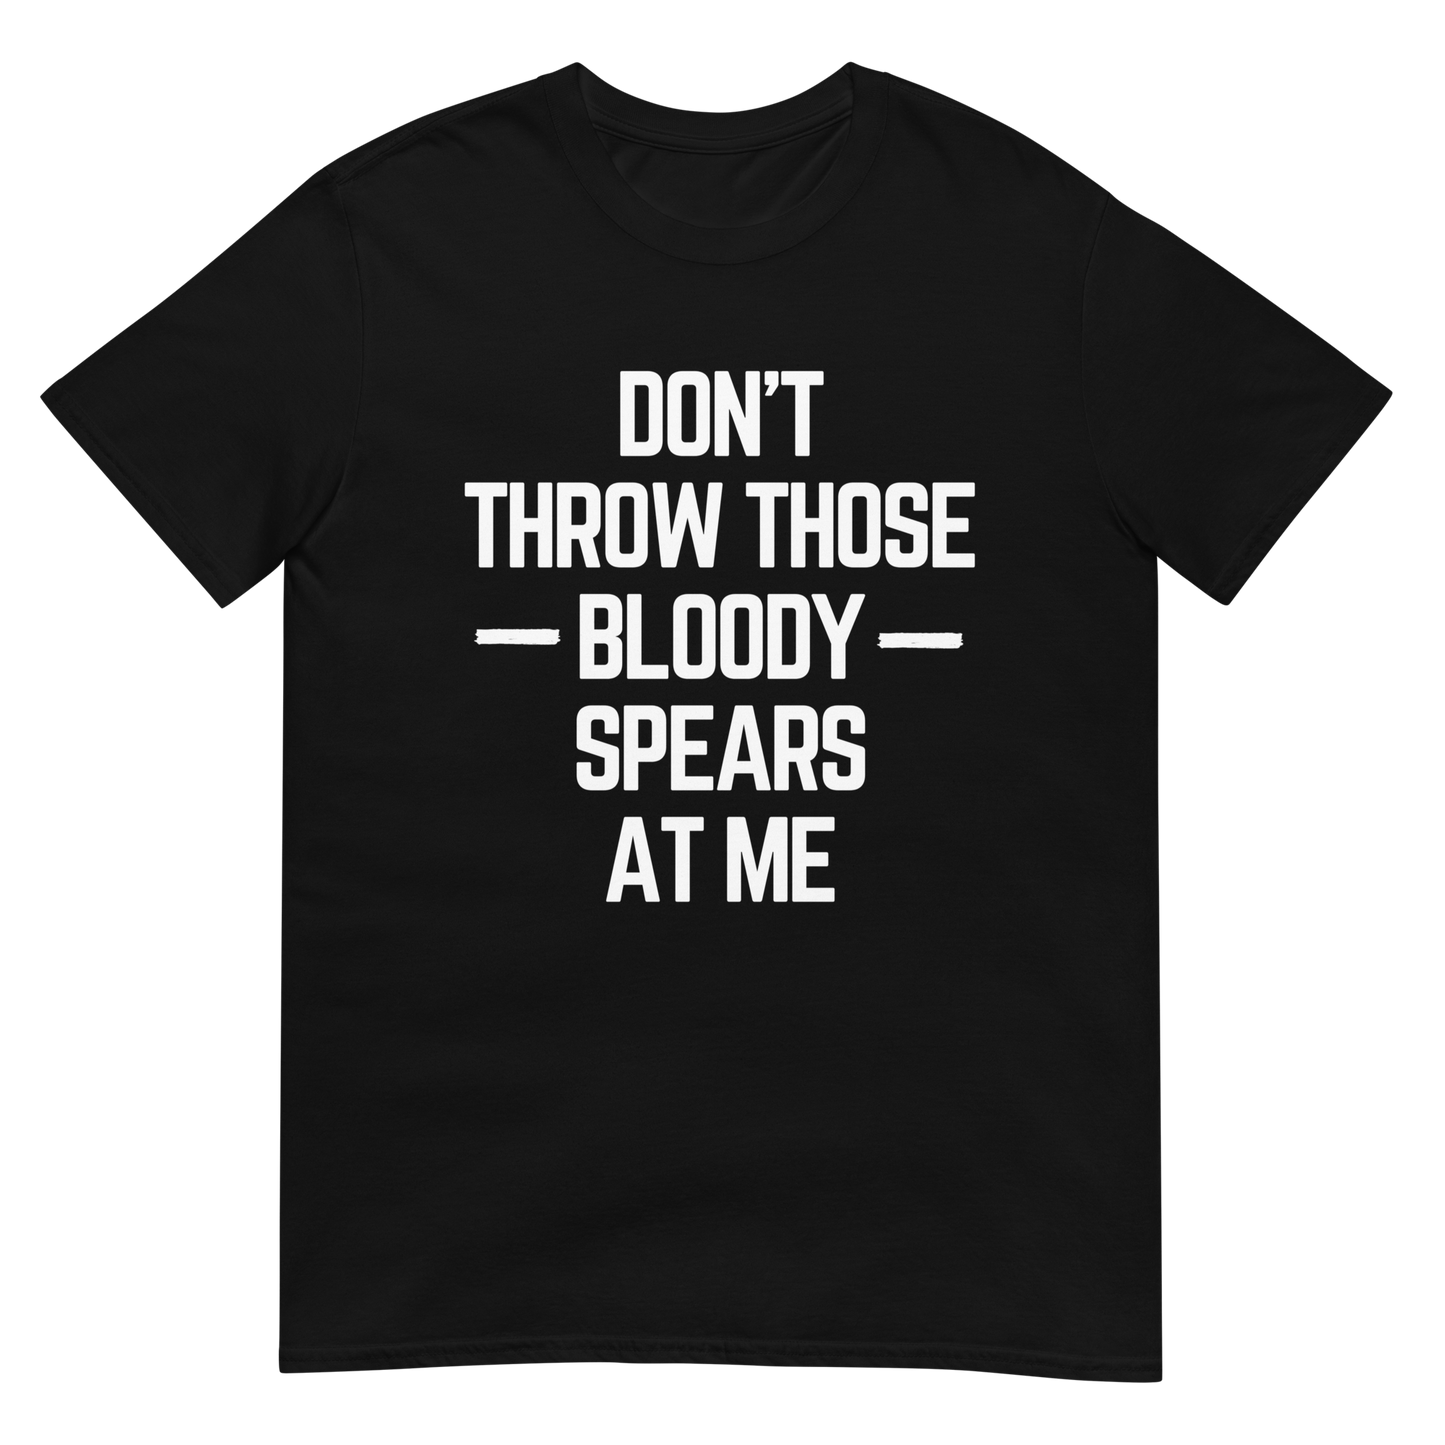 "Don't Throw Those Bloody Spears At Me" (t-shirt)